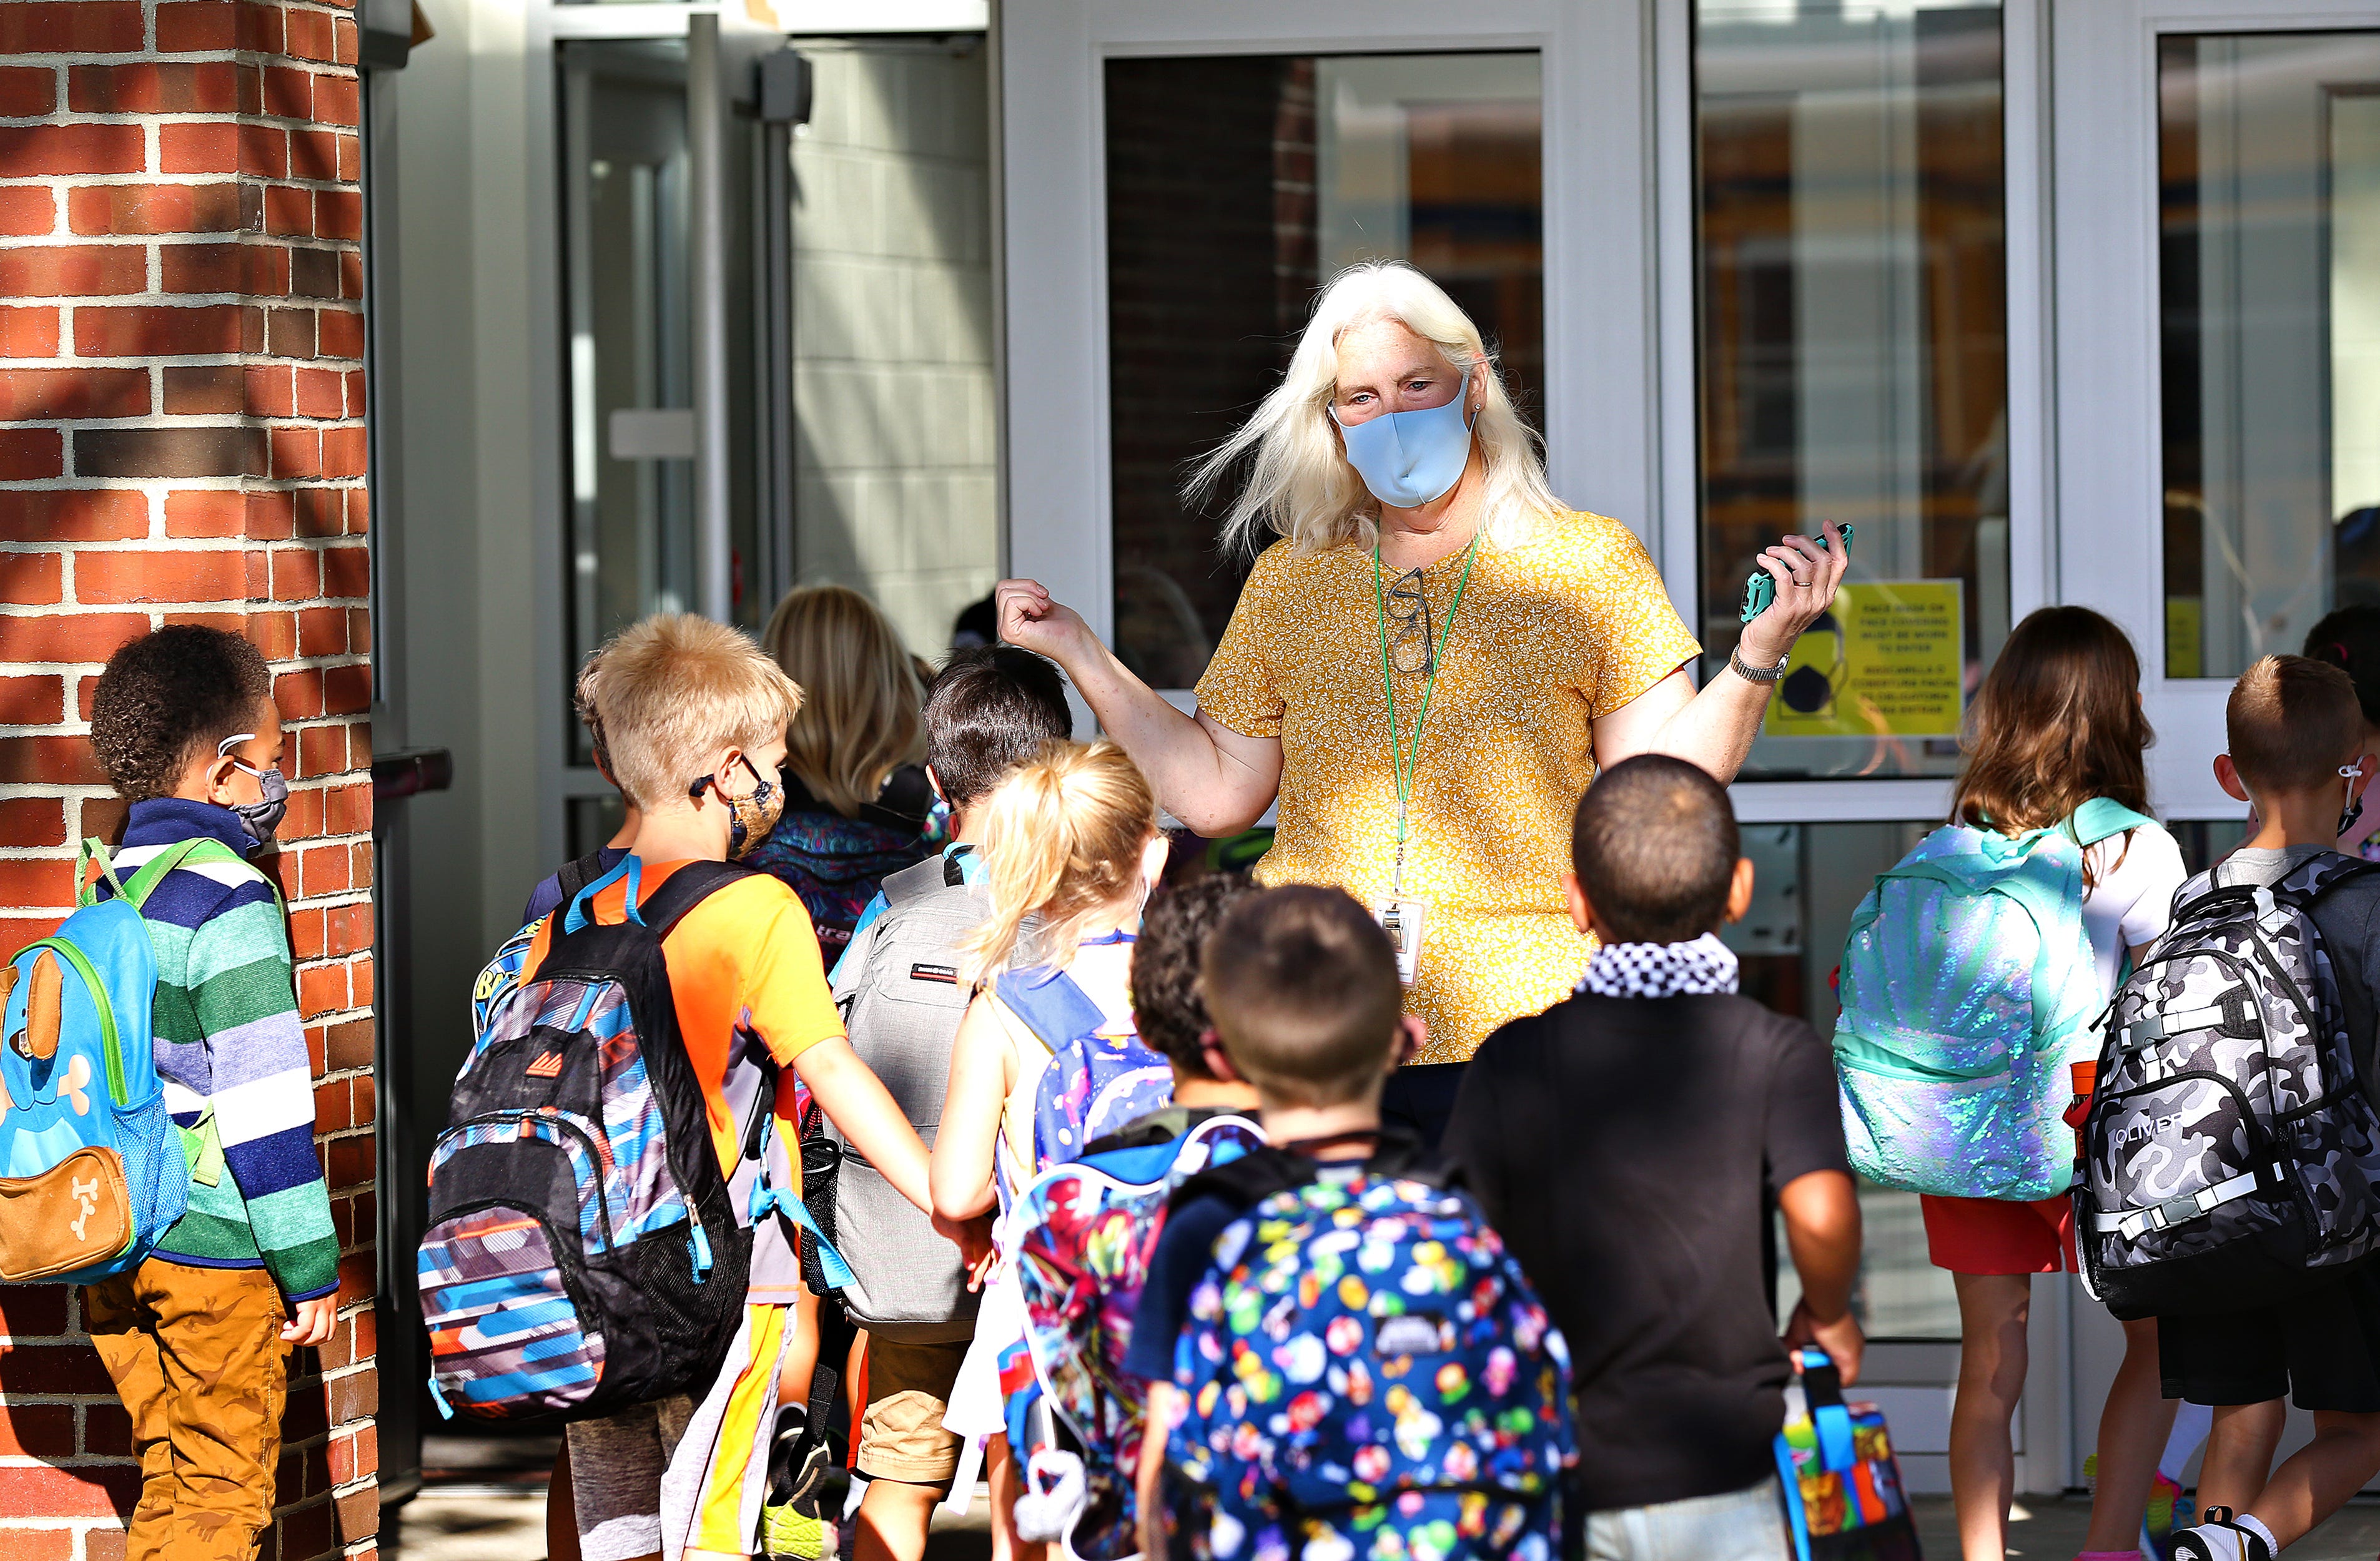 Para professional aide Jackie Dommel greets students as they arrive on the first day of school at Valley View Elementary School in Spring Garden Township, Thursday, Aug. 19, 2021. Dawn J. Sagert photo